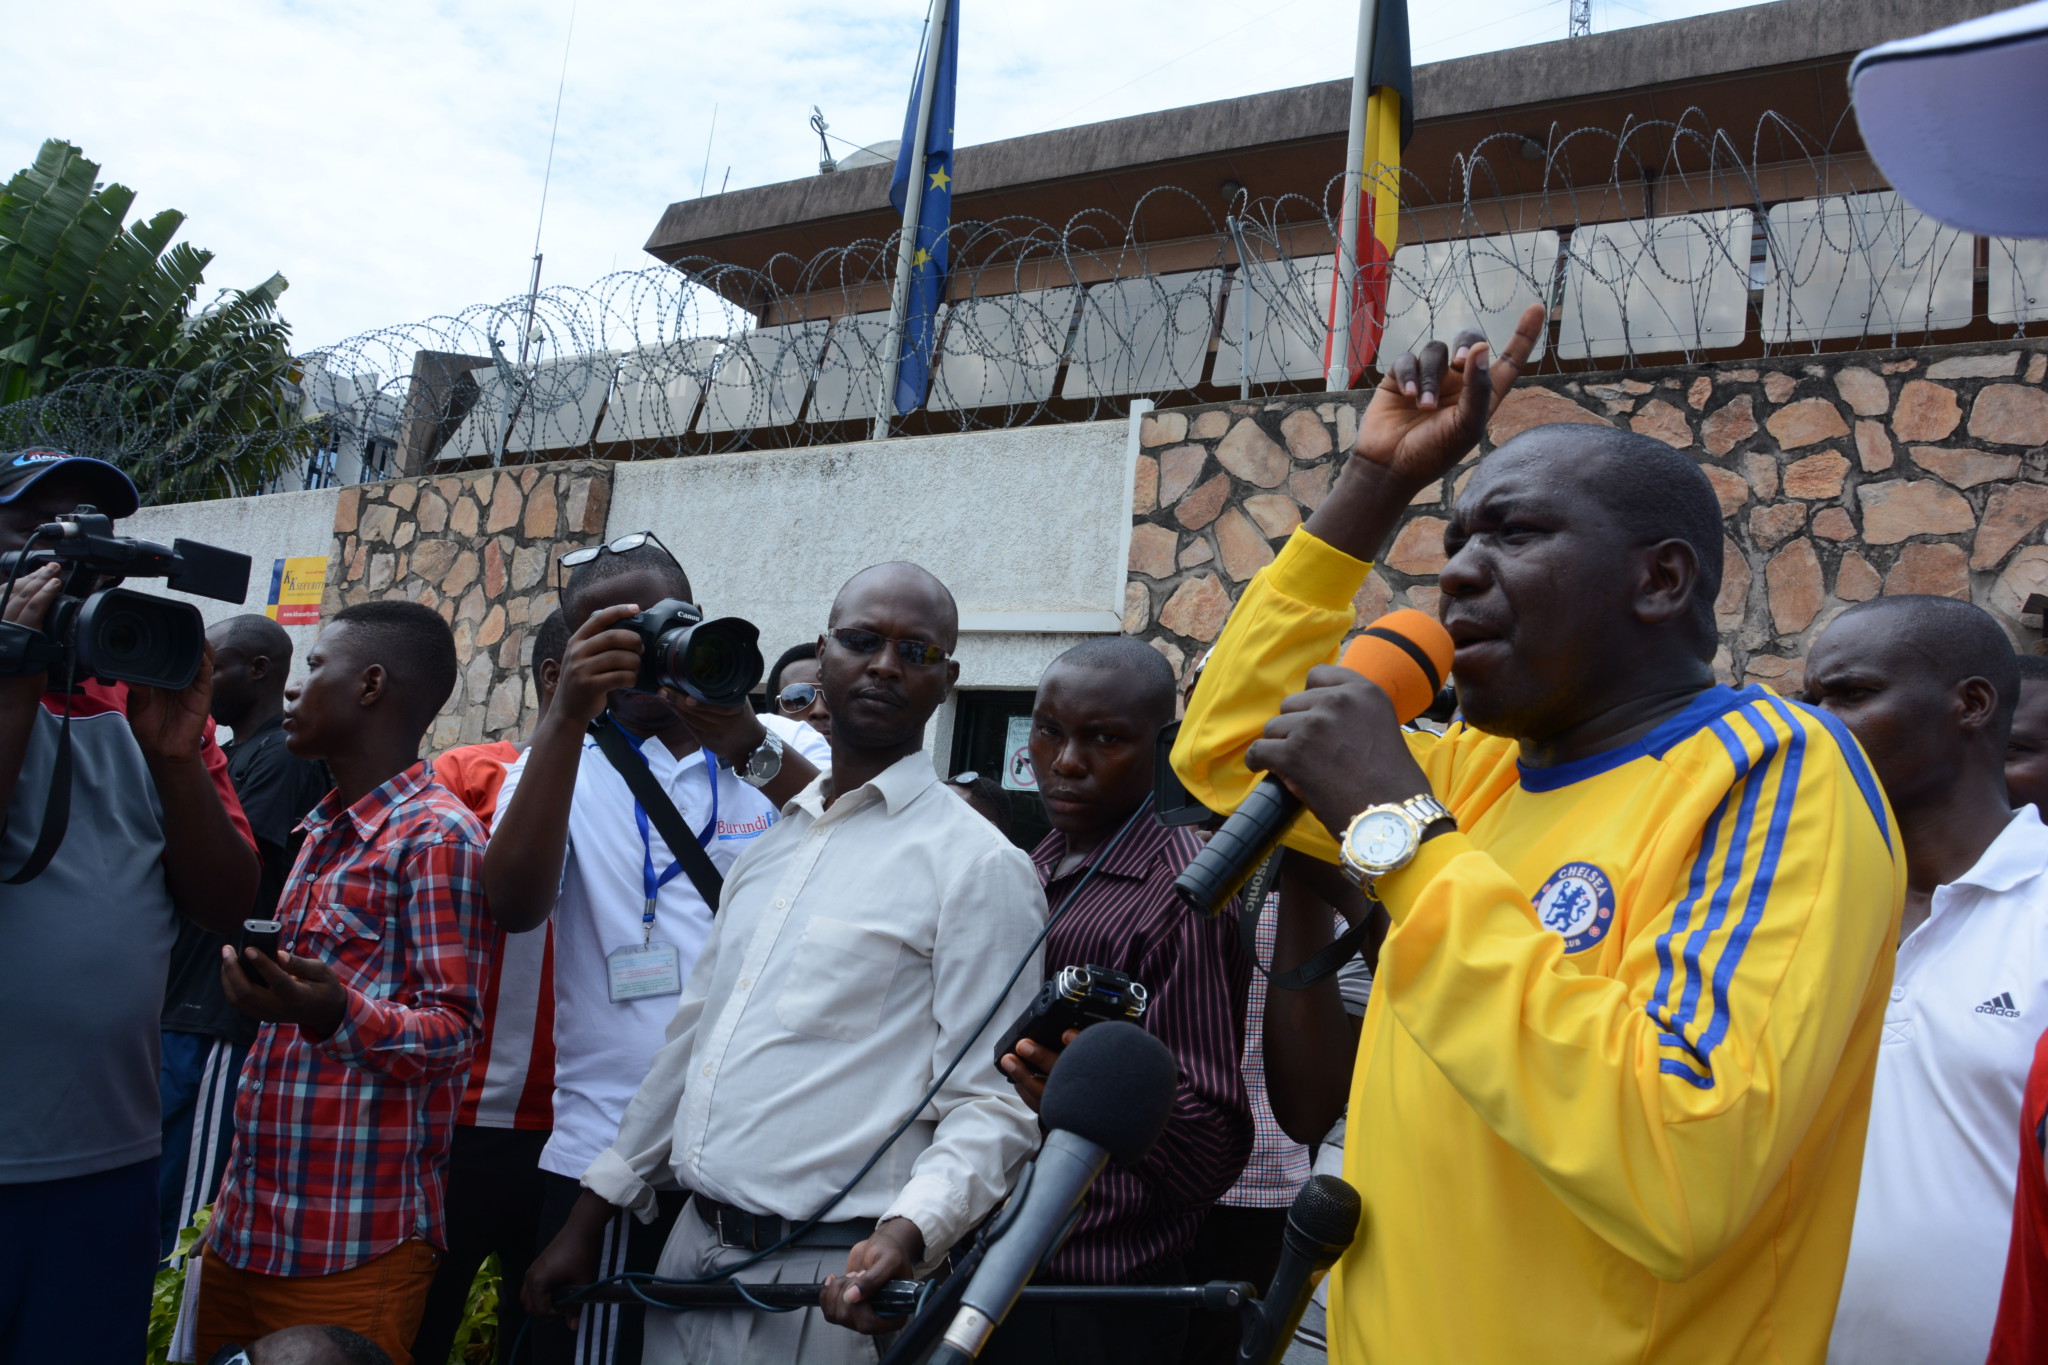 François-Xavier Ndaruzanye, Chairman of Human Rights League “Izere Ntiwihebure” in a protest march against the deployment of UN commissioners of enquiry in Burundi